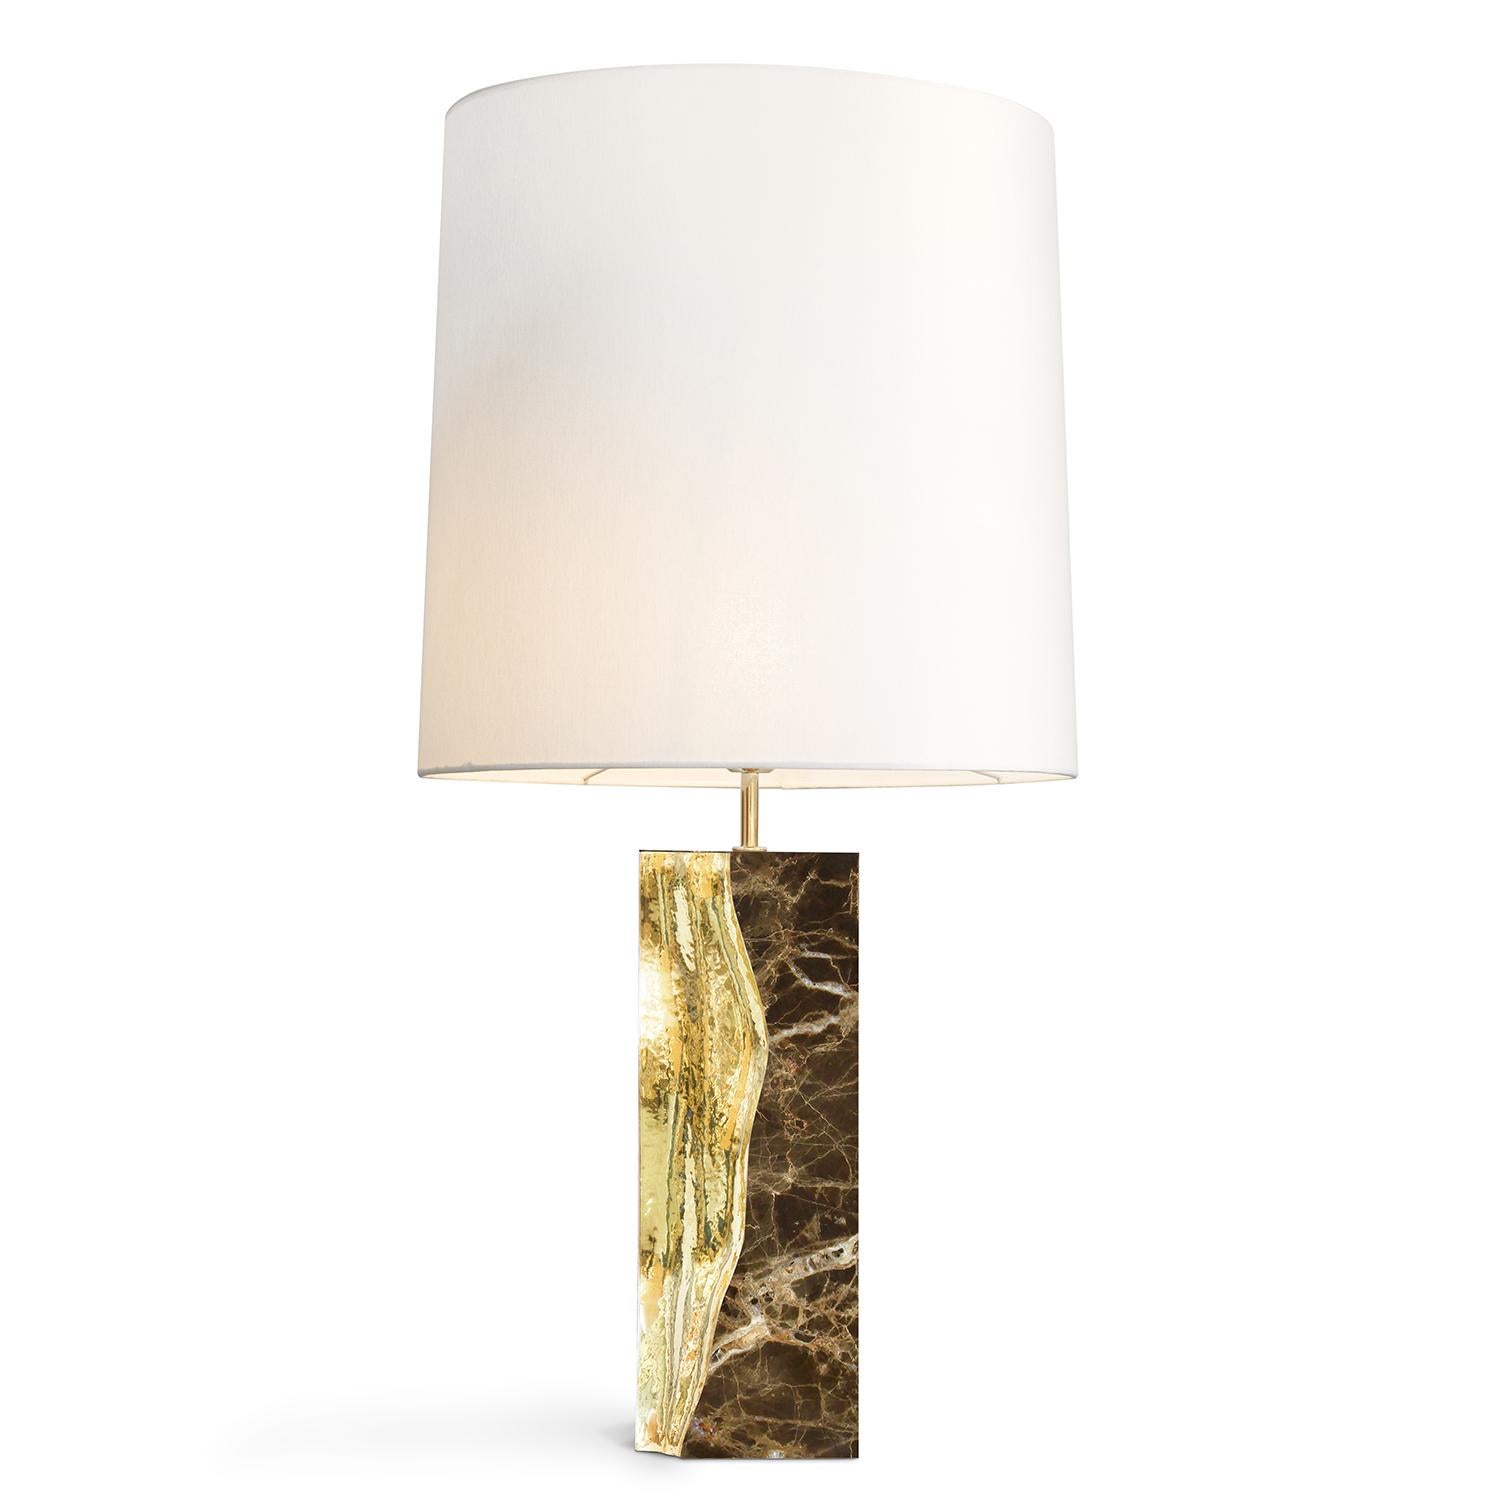 Table Lamp Paradise Brown Marble with brown marble base
carved and polished. Base including polished brass detail,
including a round shade, dimensions : Diameter 40xH45cm.
Base dimensions: L15xD15xH40cm.
1 bulb, lamp holder type E27, max 40 watt,